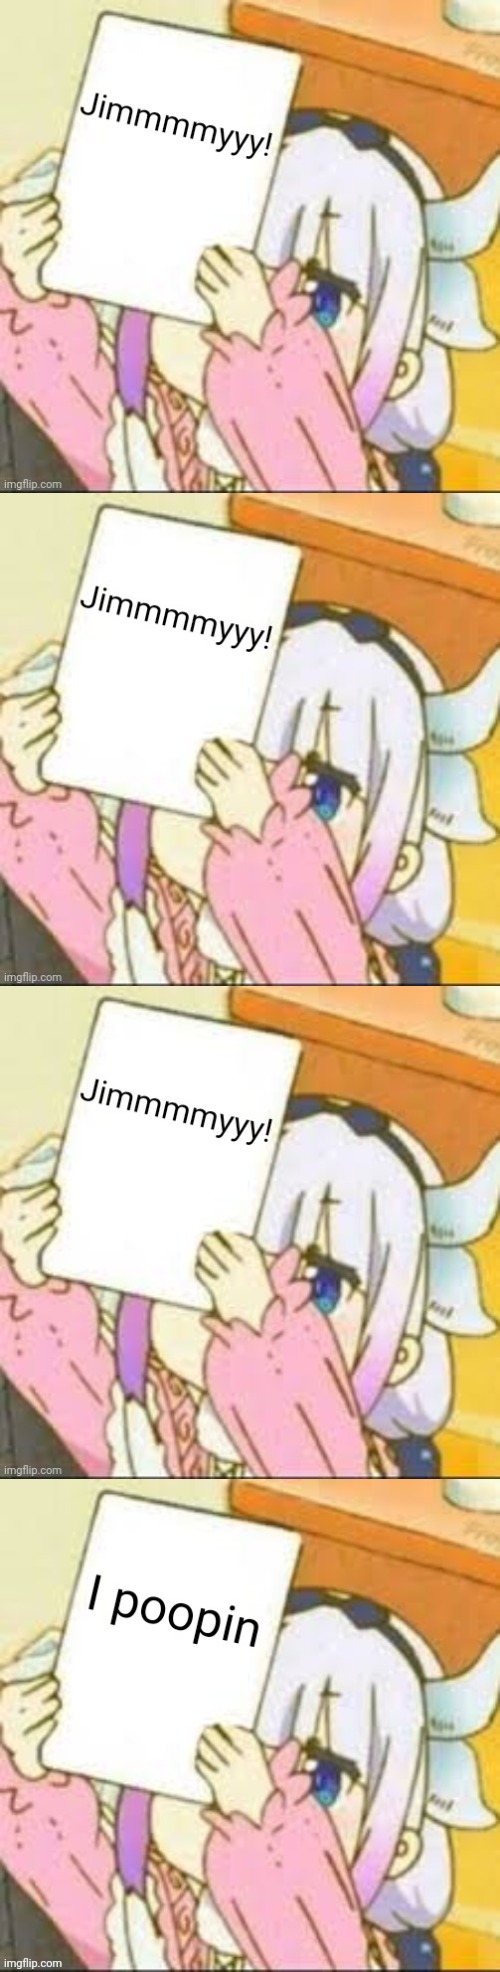 Kona wants you all to know something | image tagged in dragon maid,funny,memes,trolling,cute | made w/ Imgflip meme maker